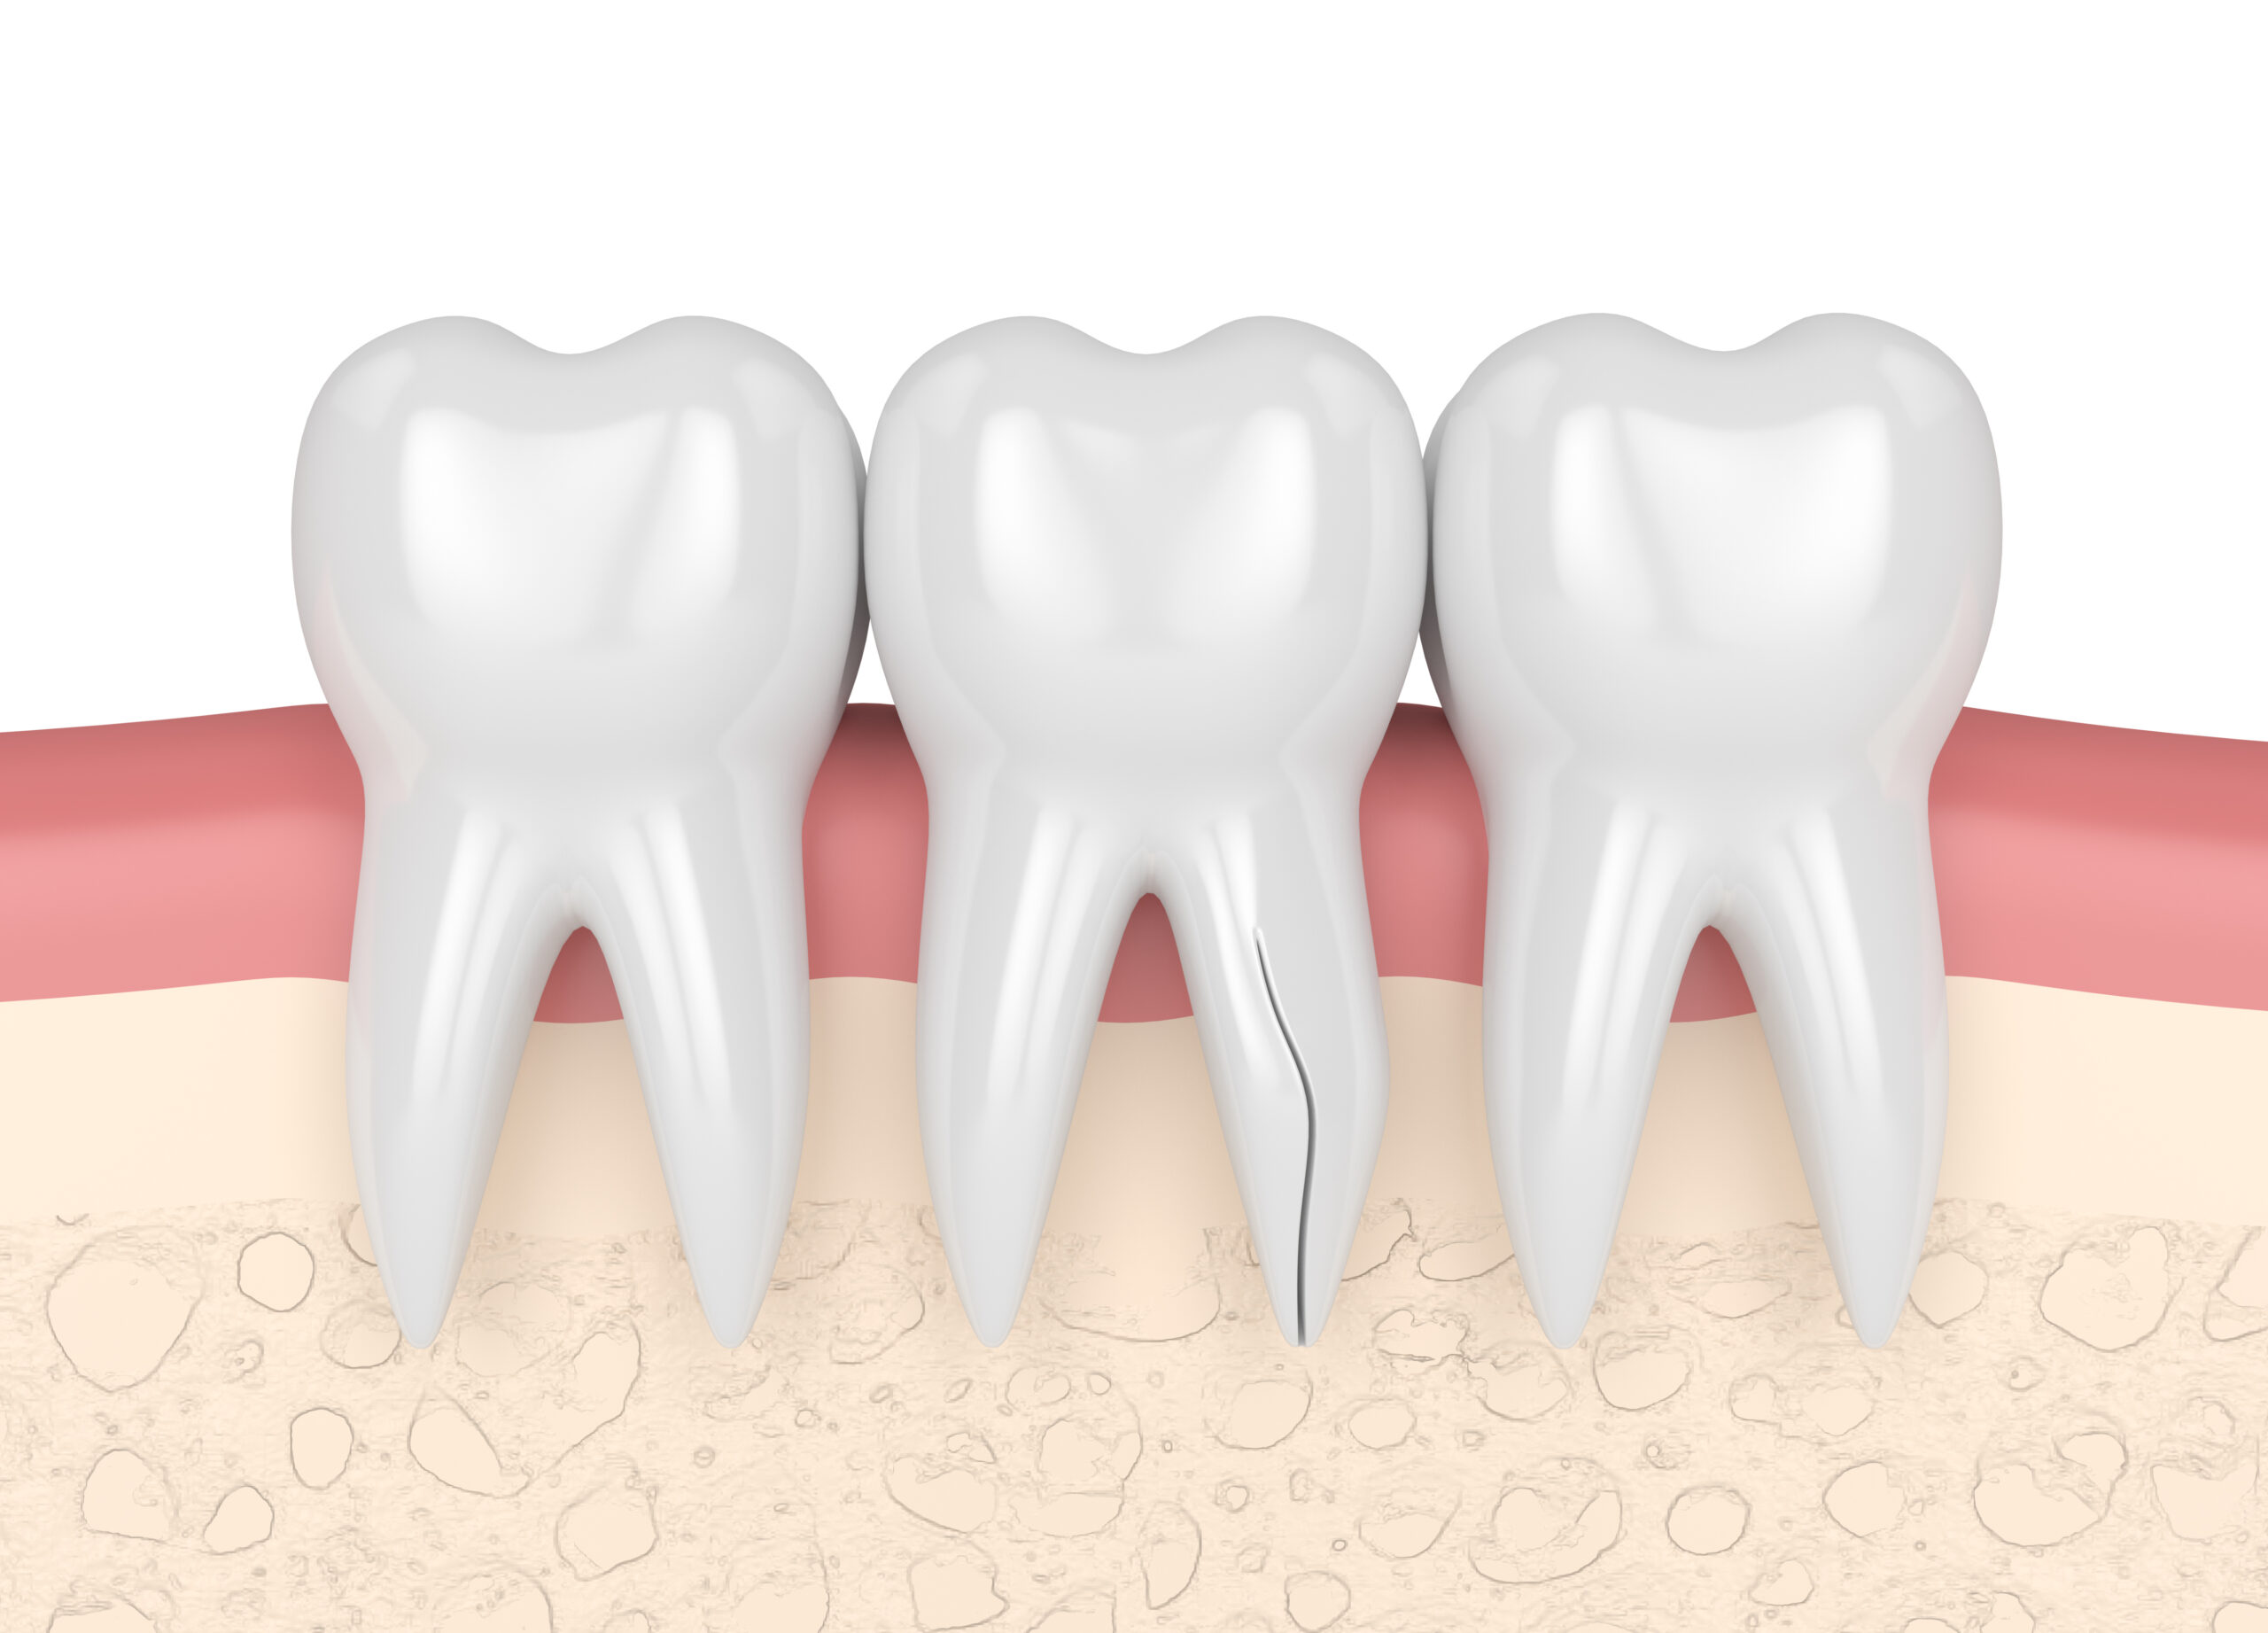 3d render of gums with cracked tooth root over white background. Vertical fracture. Different types of broken teeth concept.